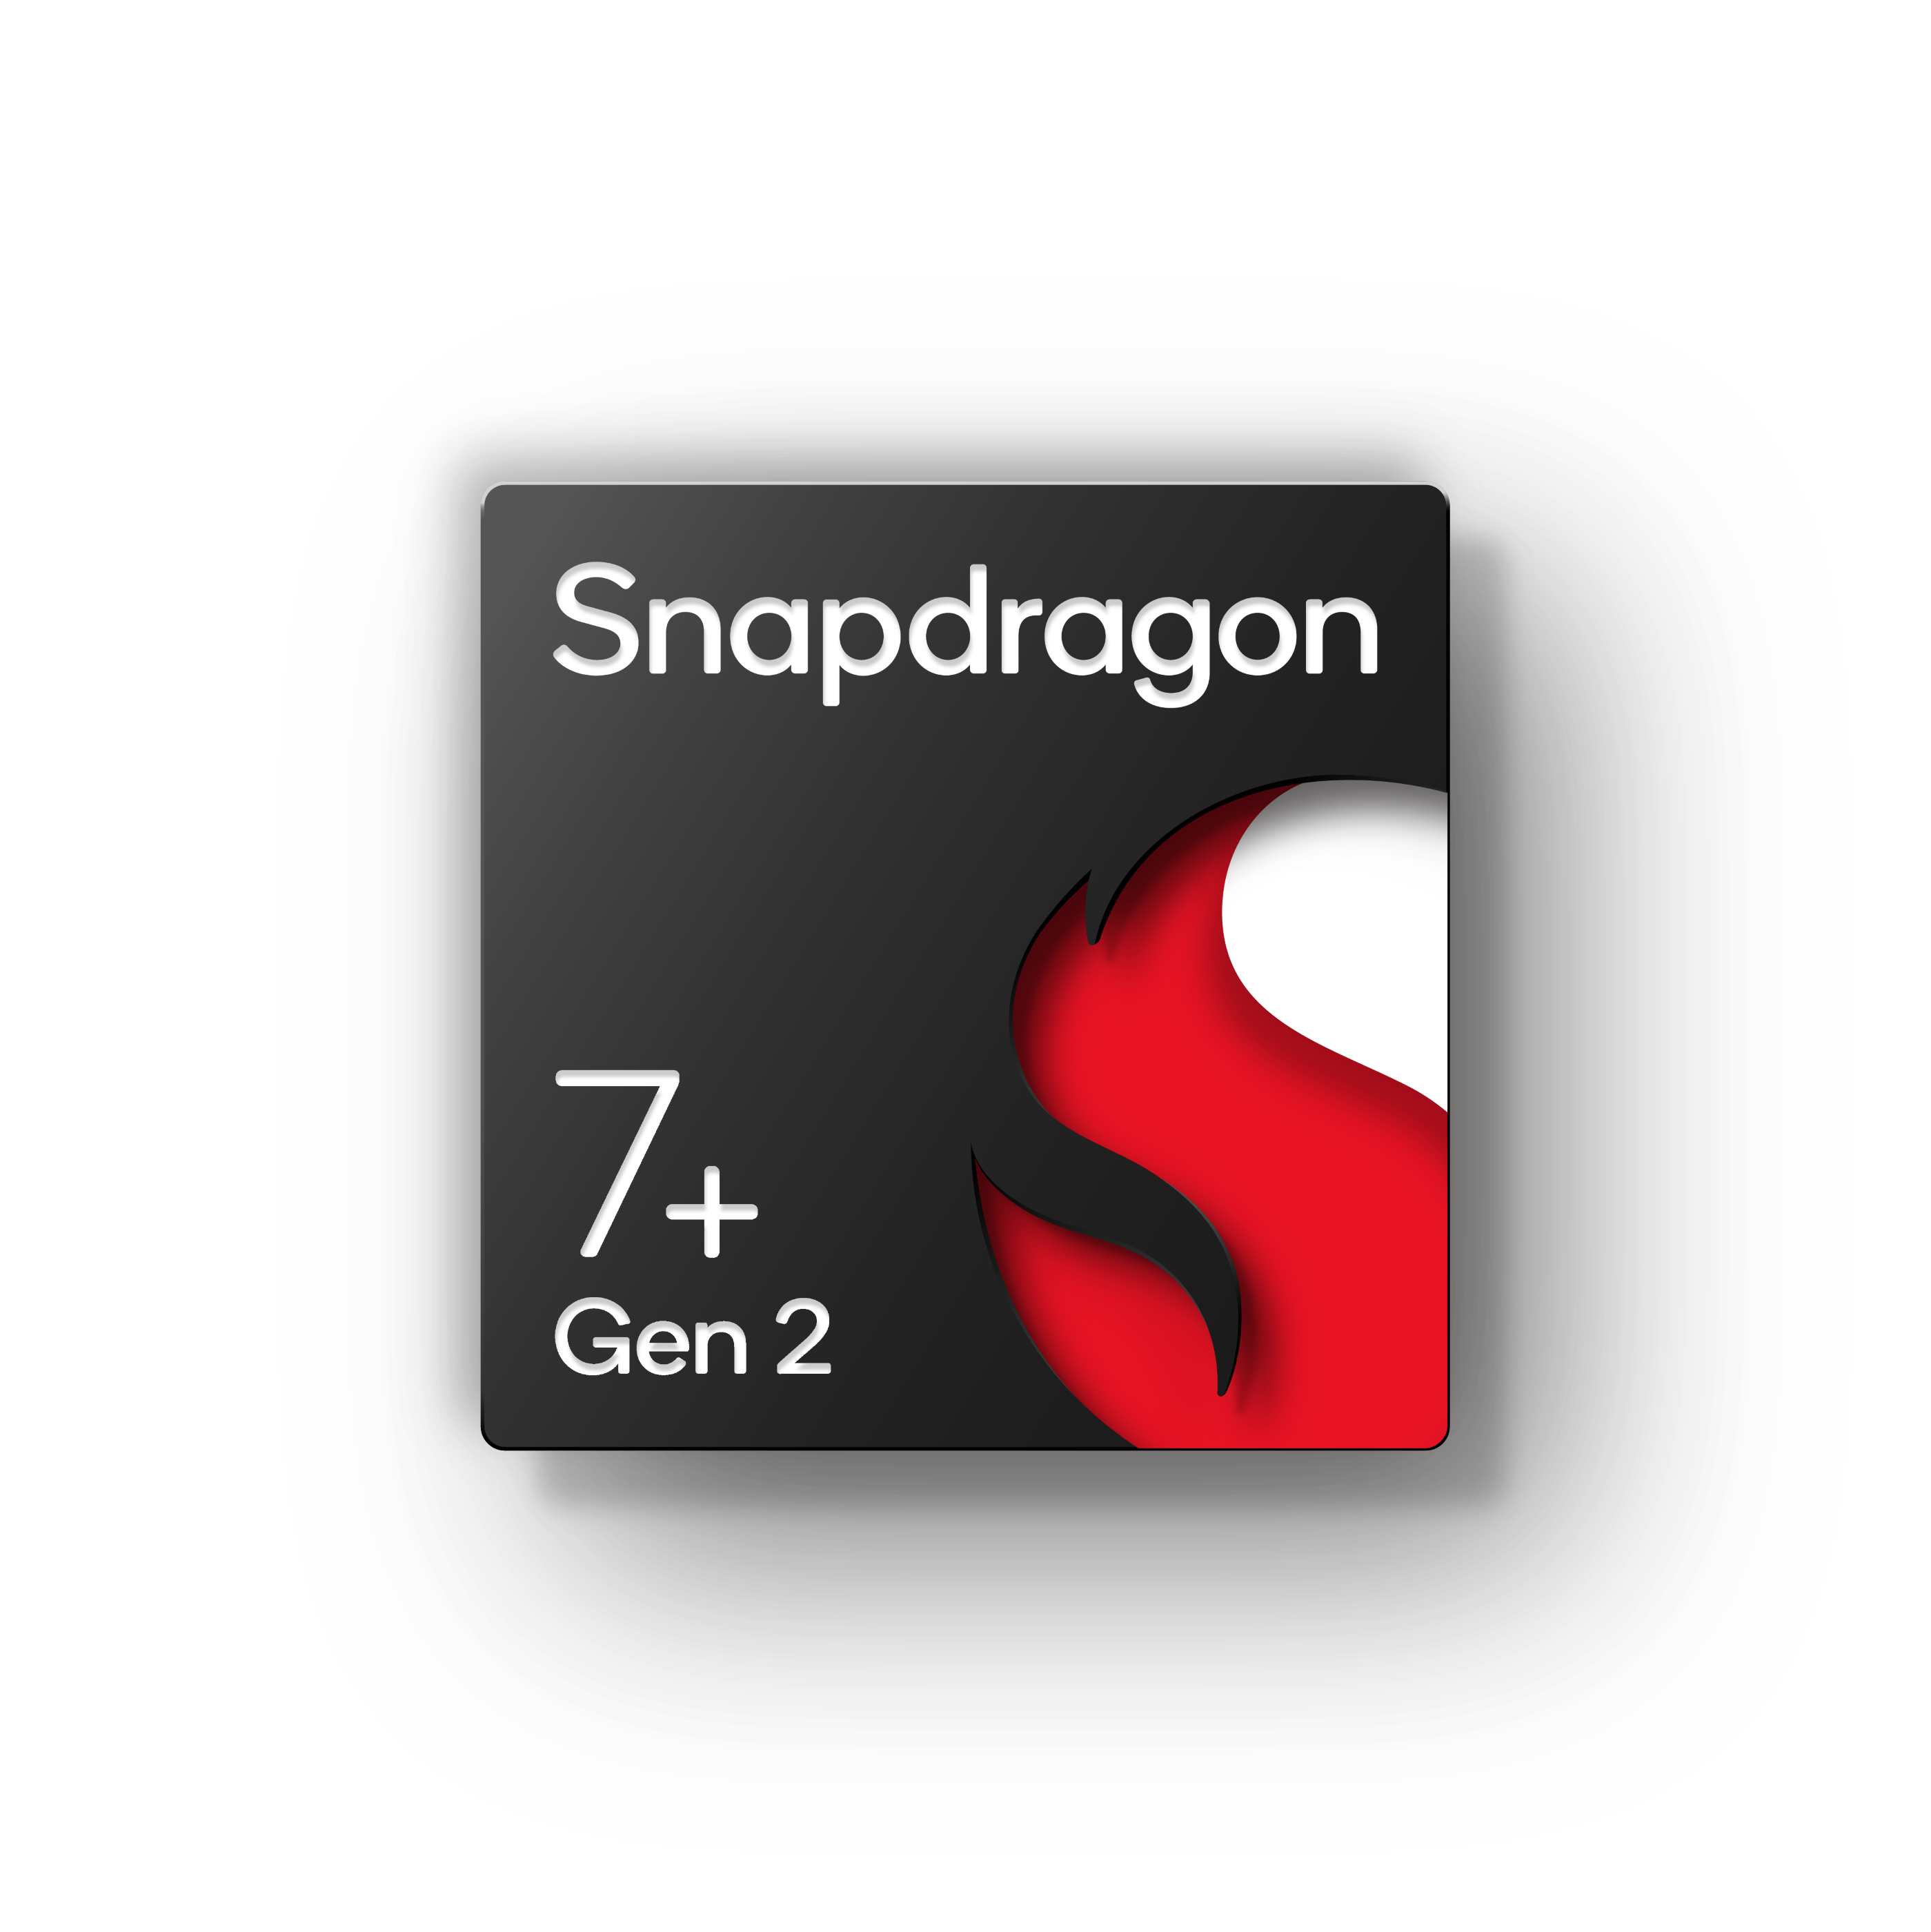 Legendary entertainment, unleashed: New Snapdragon 7+ Gen 2 is our